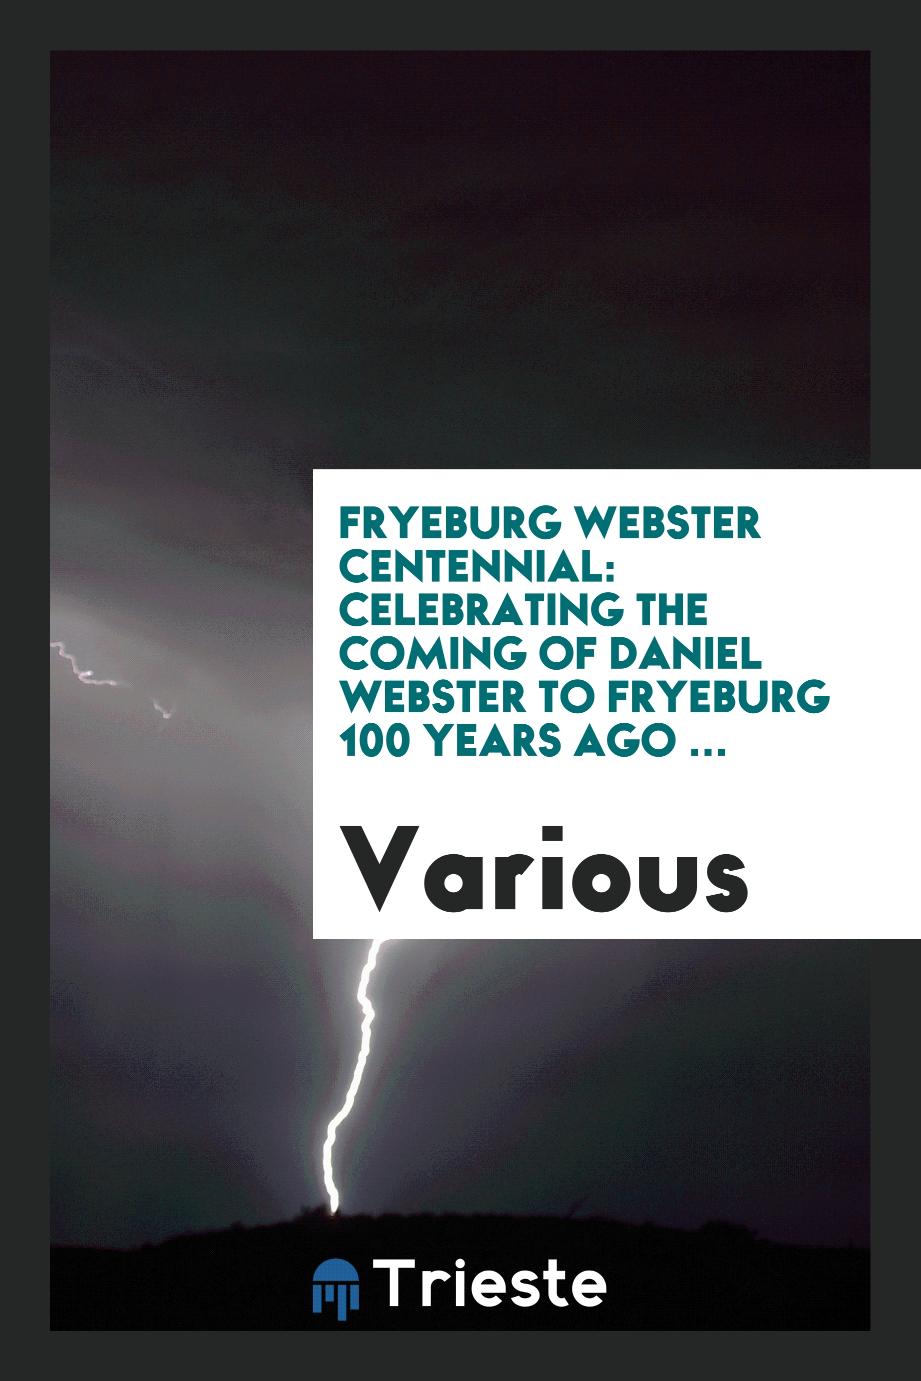 Fryeburg Webster Centennial: Celebrating the Coming of Daniel Webster to Fryeburg 100 Years Ago ...